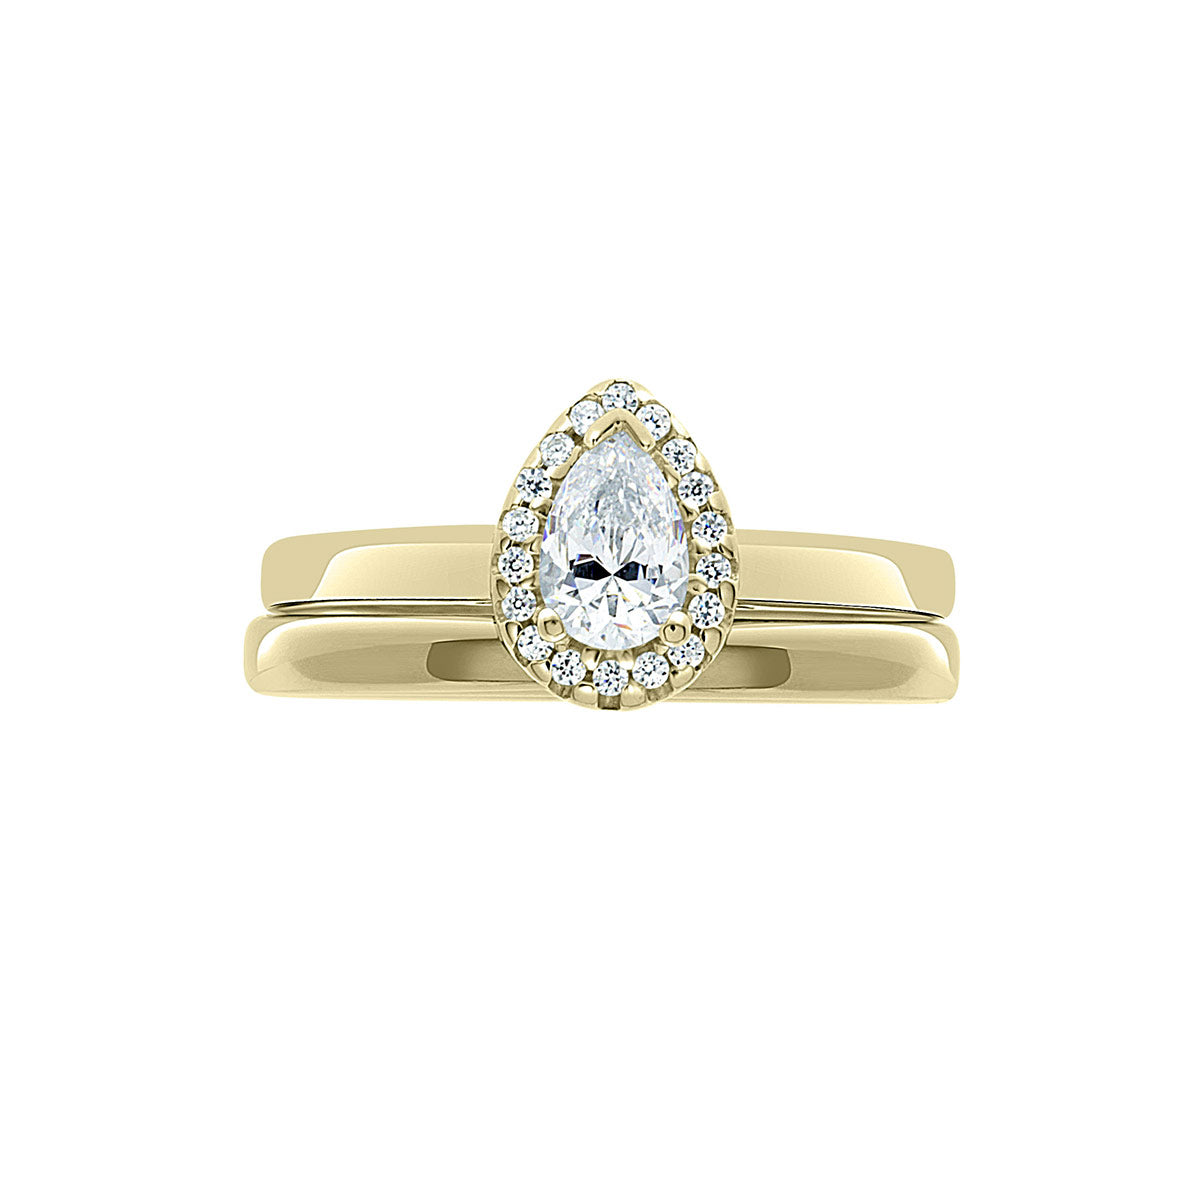 Vintage Engagement Ring with Pear Shape Diamond in yellow gold with a matching plain wedding ring